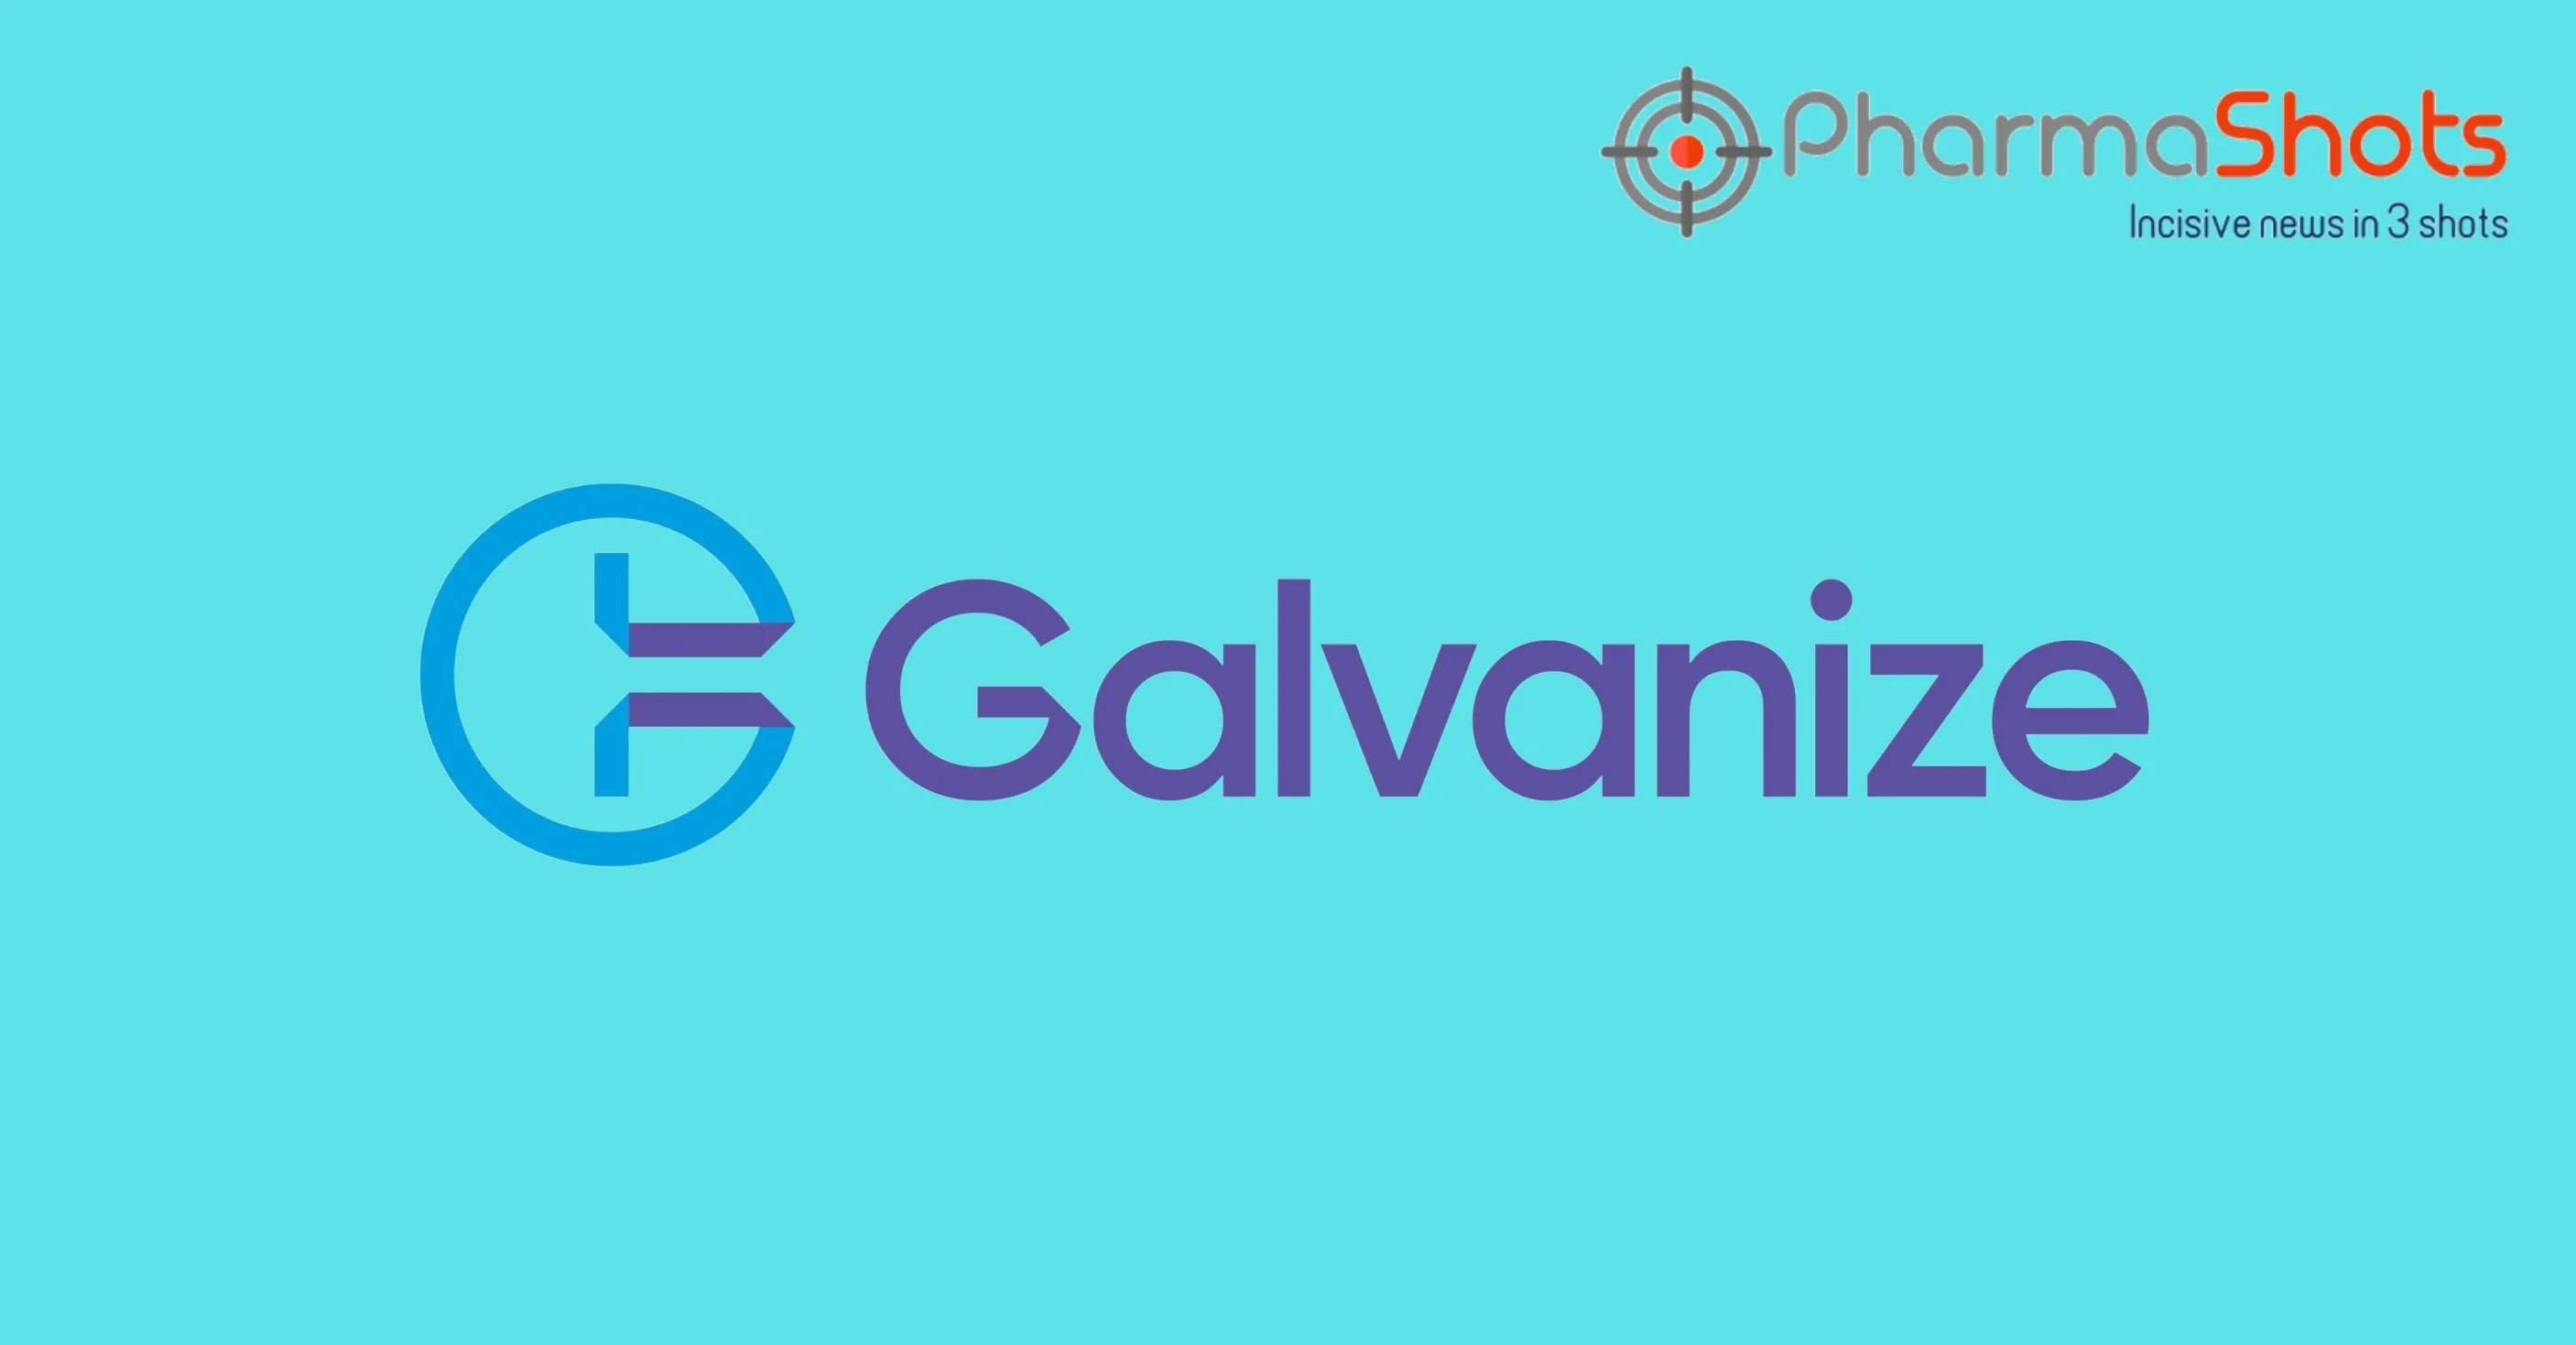 CardioFocus to Acquire Galvanize Therapeutics’ Electrophysiology Technology Division